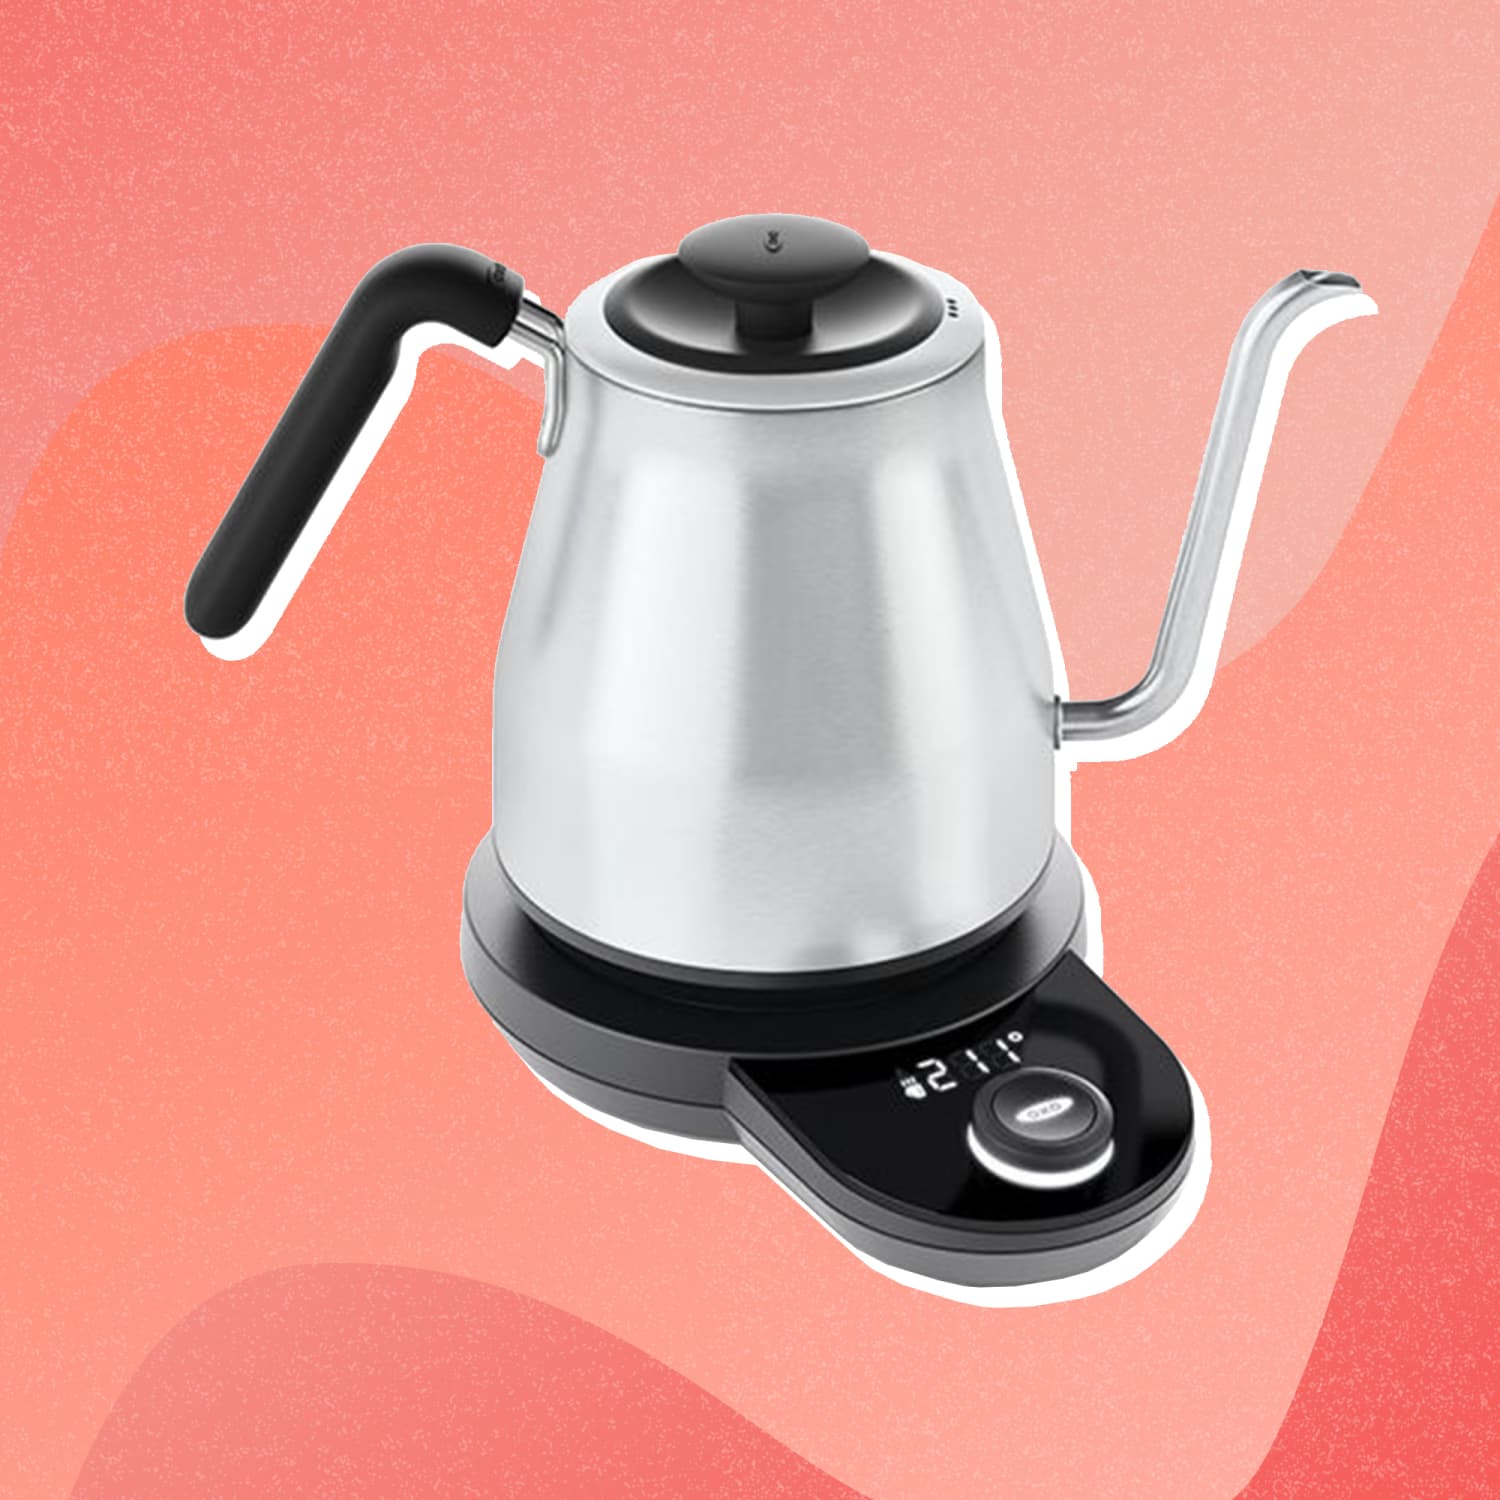 OXO Brew Adjustable Temperature Electric Kettle + Reviews